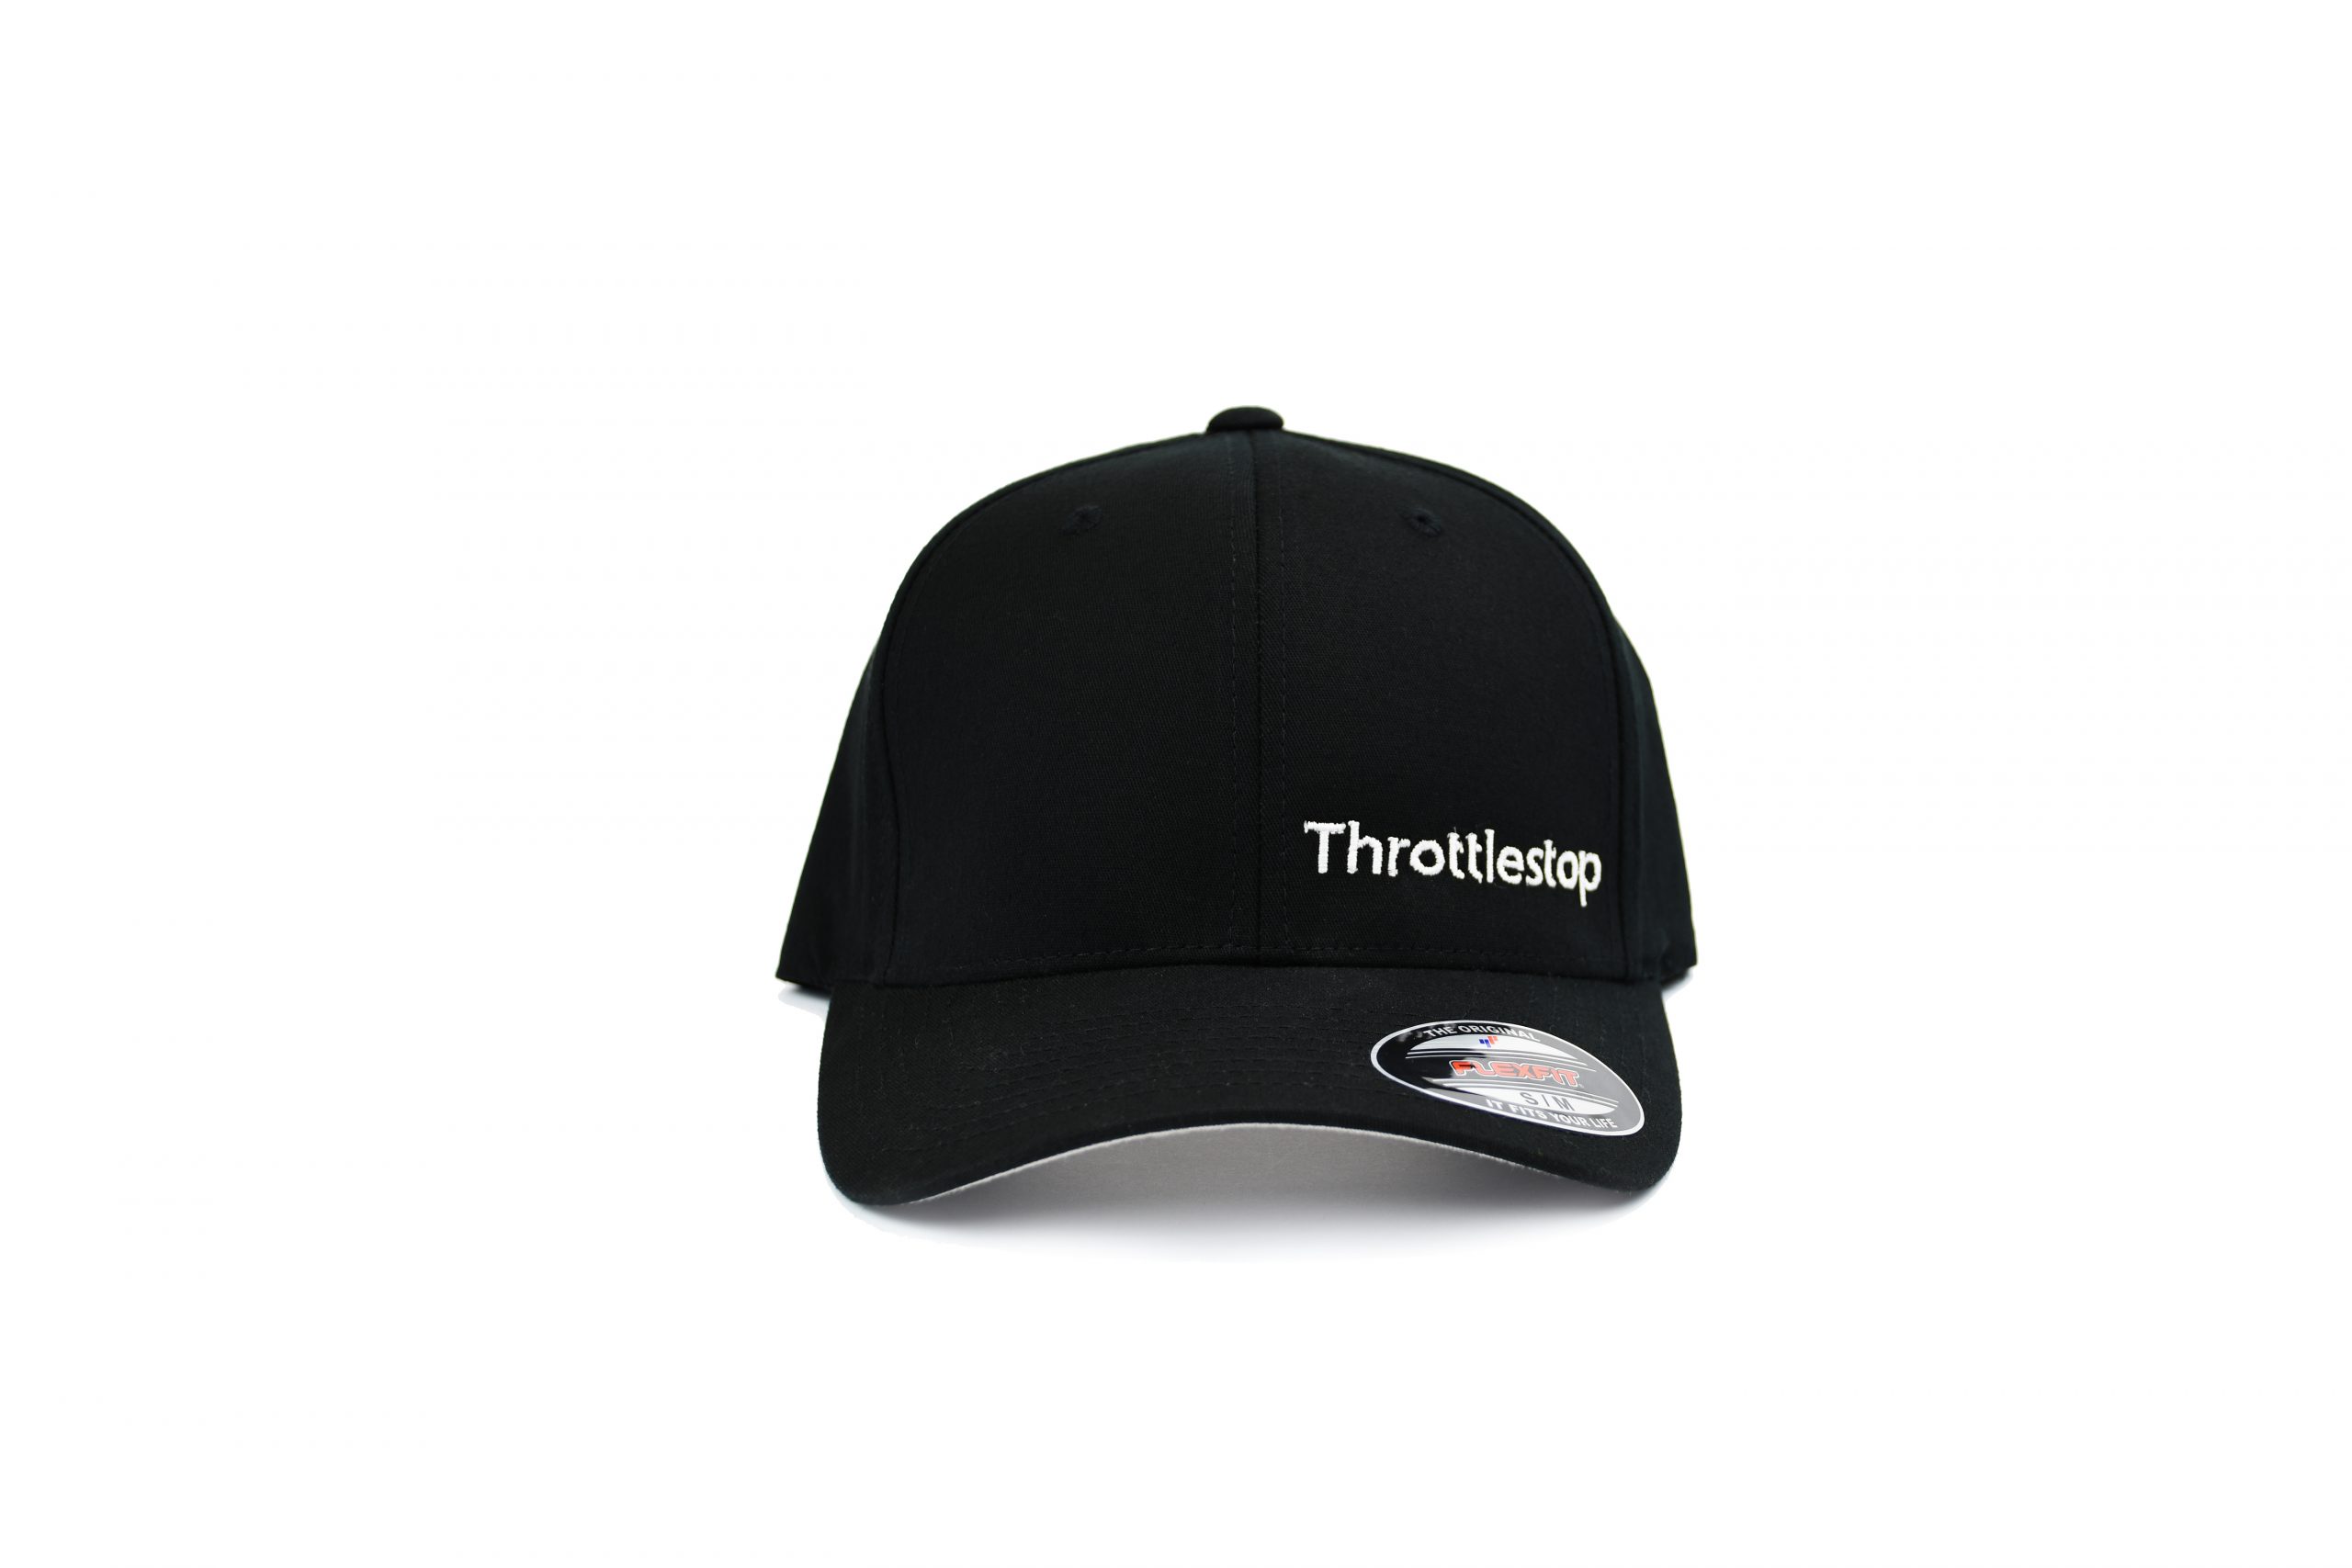 Front of hat